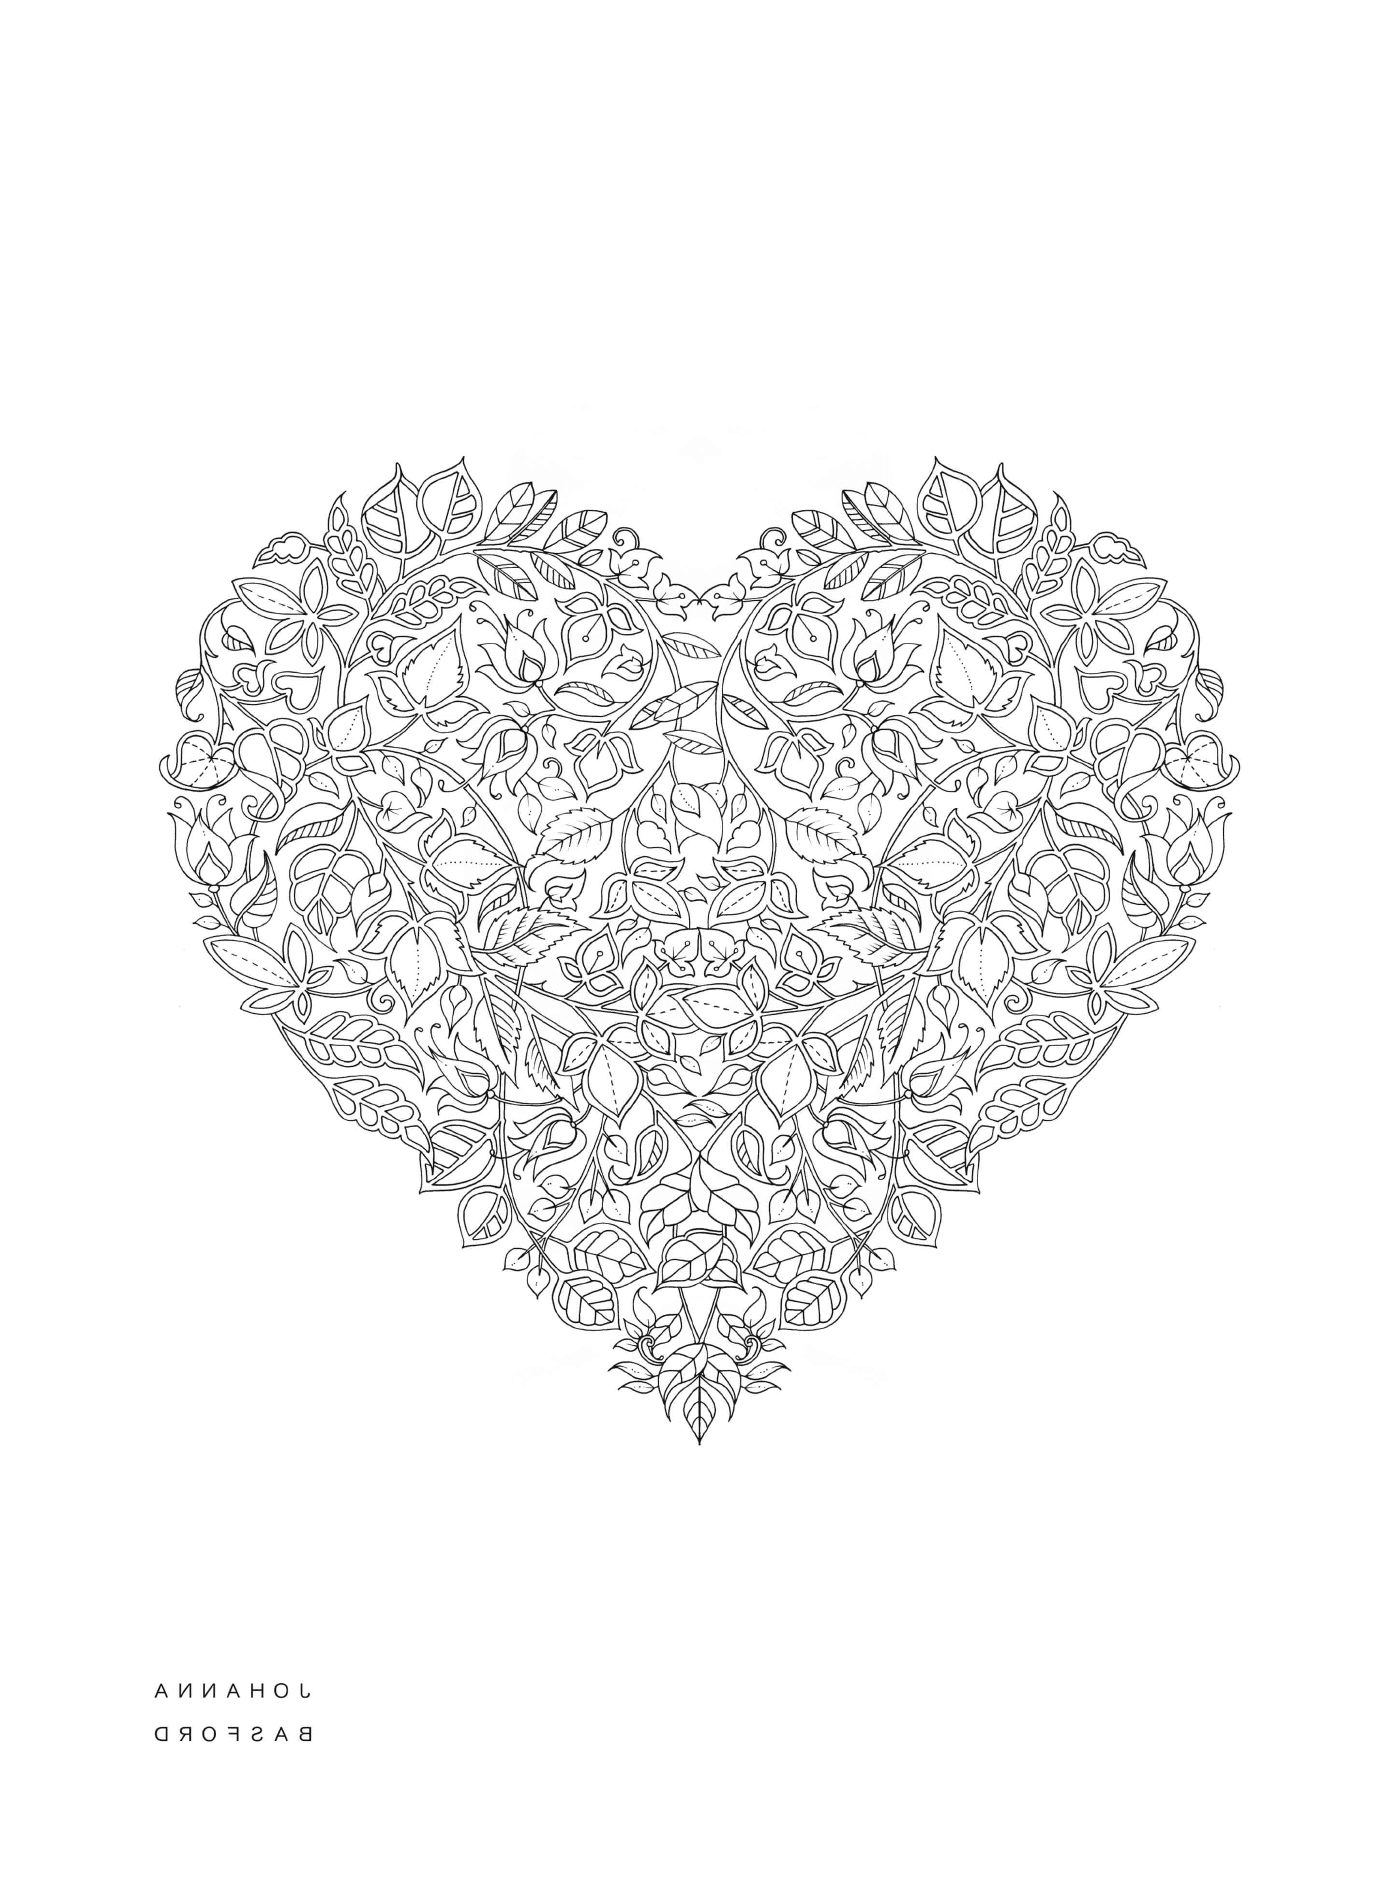  A heart with a floral design 